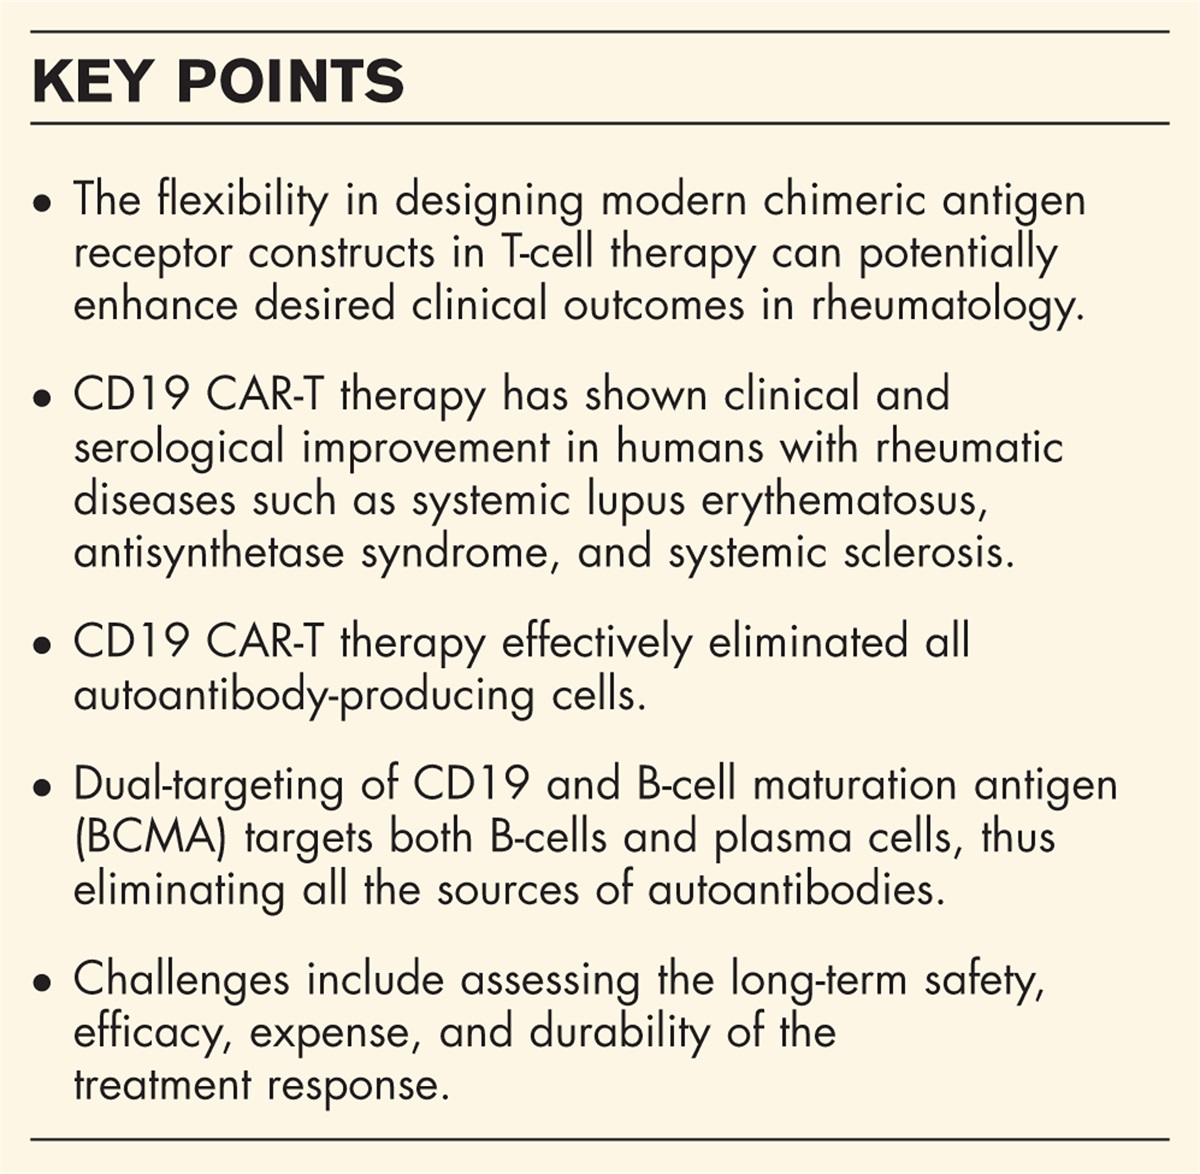 Chimeric antigen receptor T-cell therapy in rheumatology: B-cell depletion 2.0